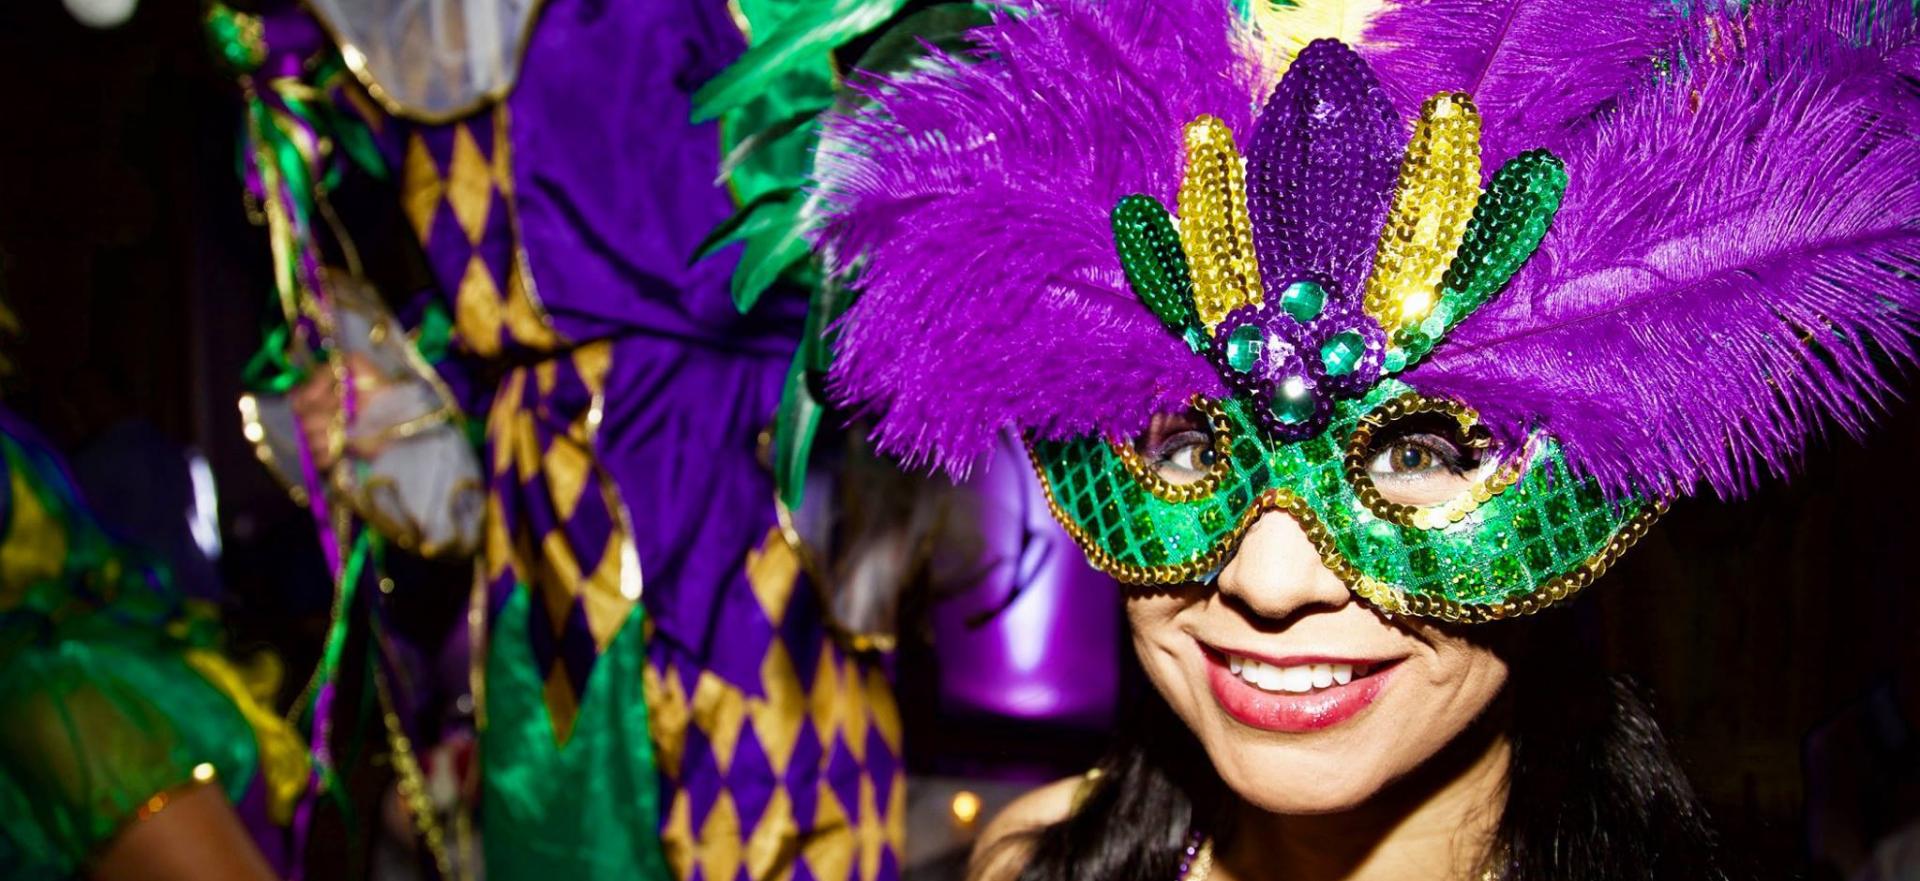 Mardi Gras party with a lady in a mask